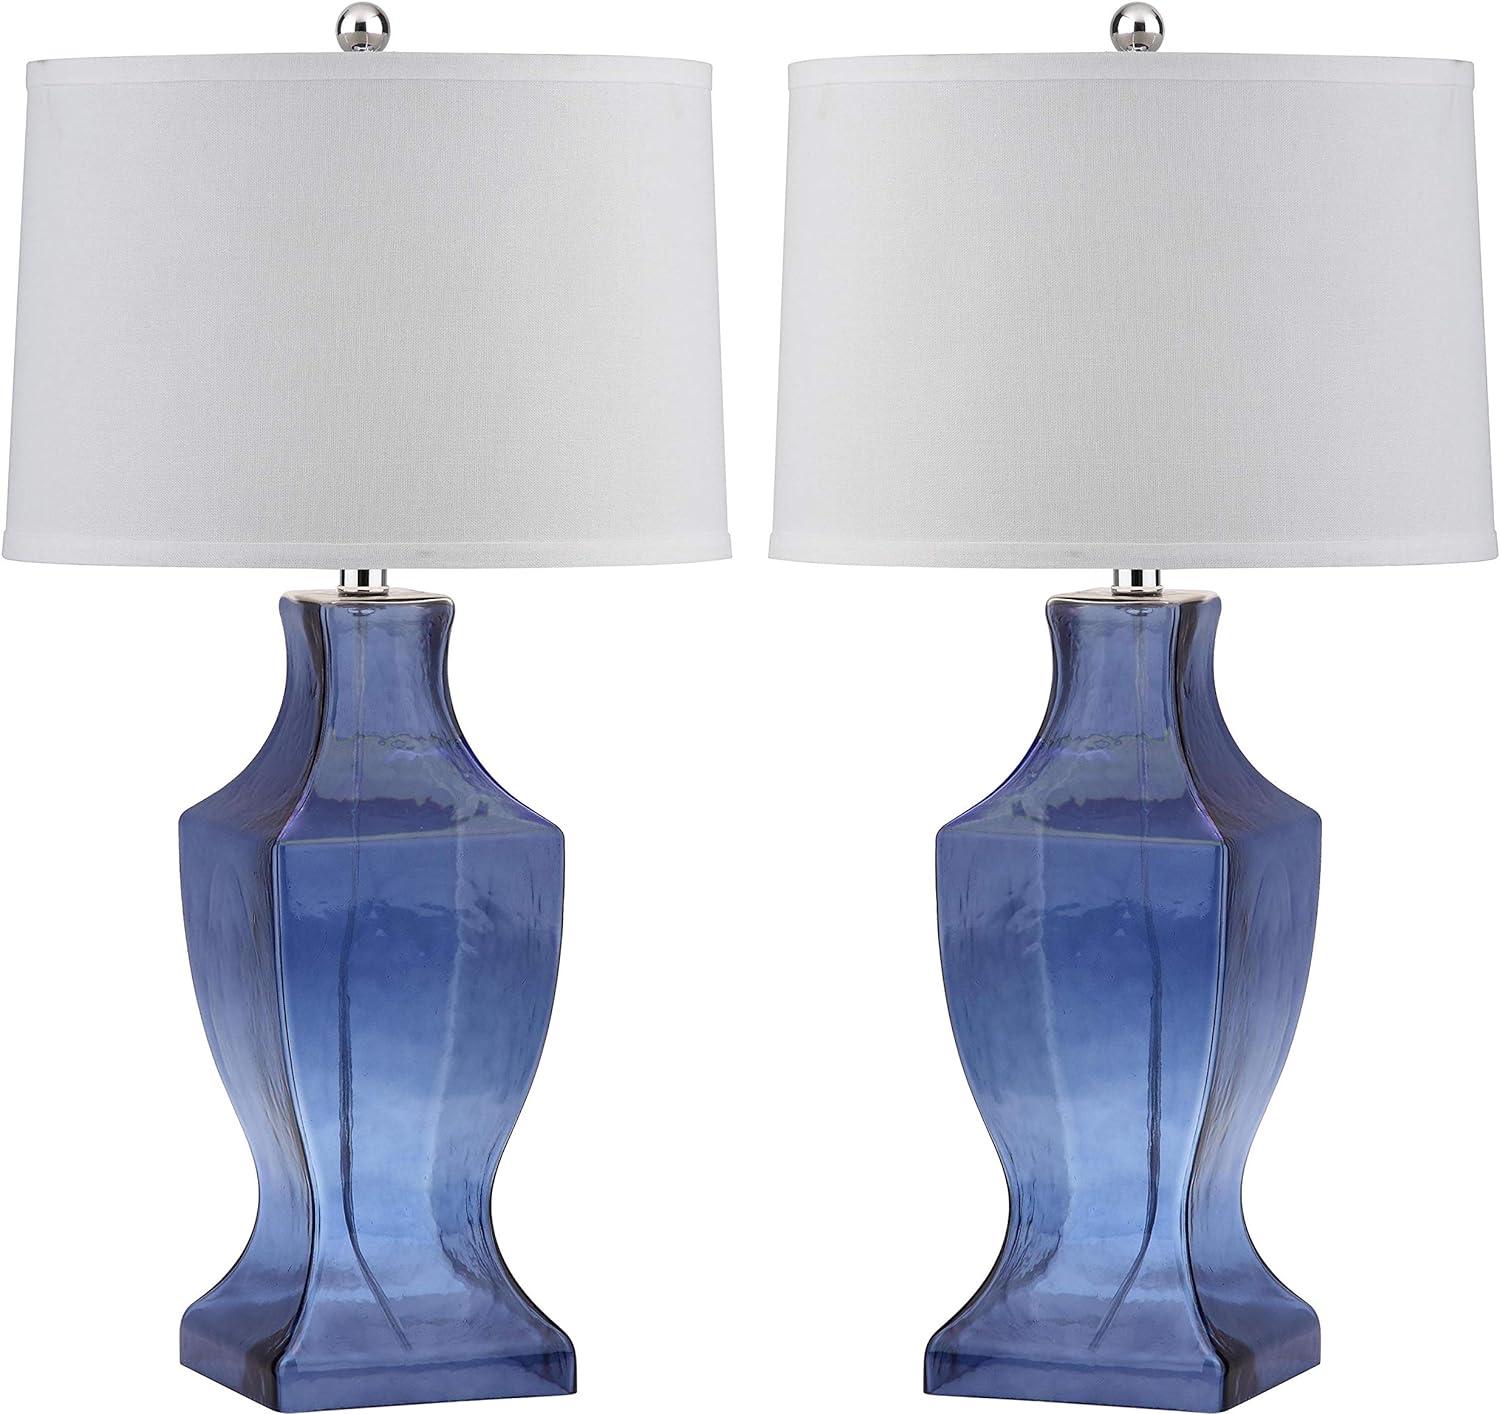 Elegant Blue Glass Urn Table Lamp Set with White Cotton Shade